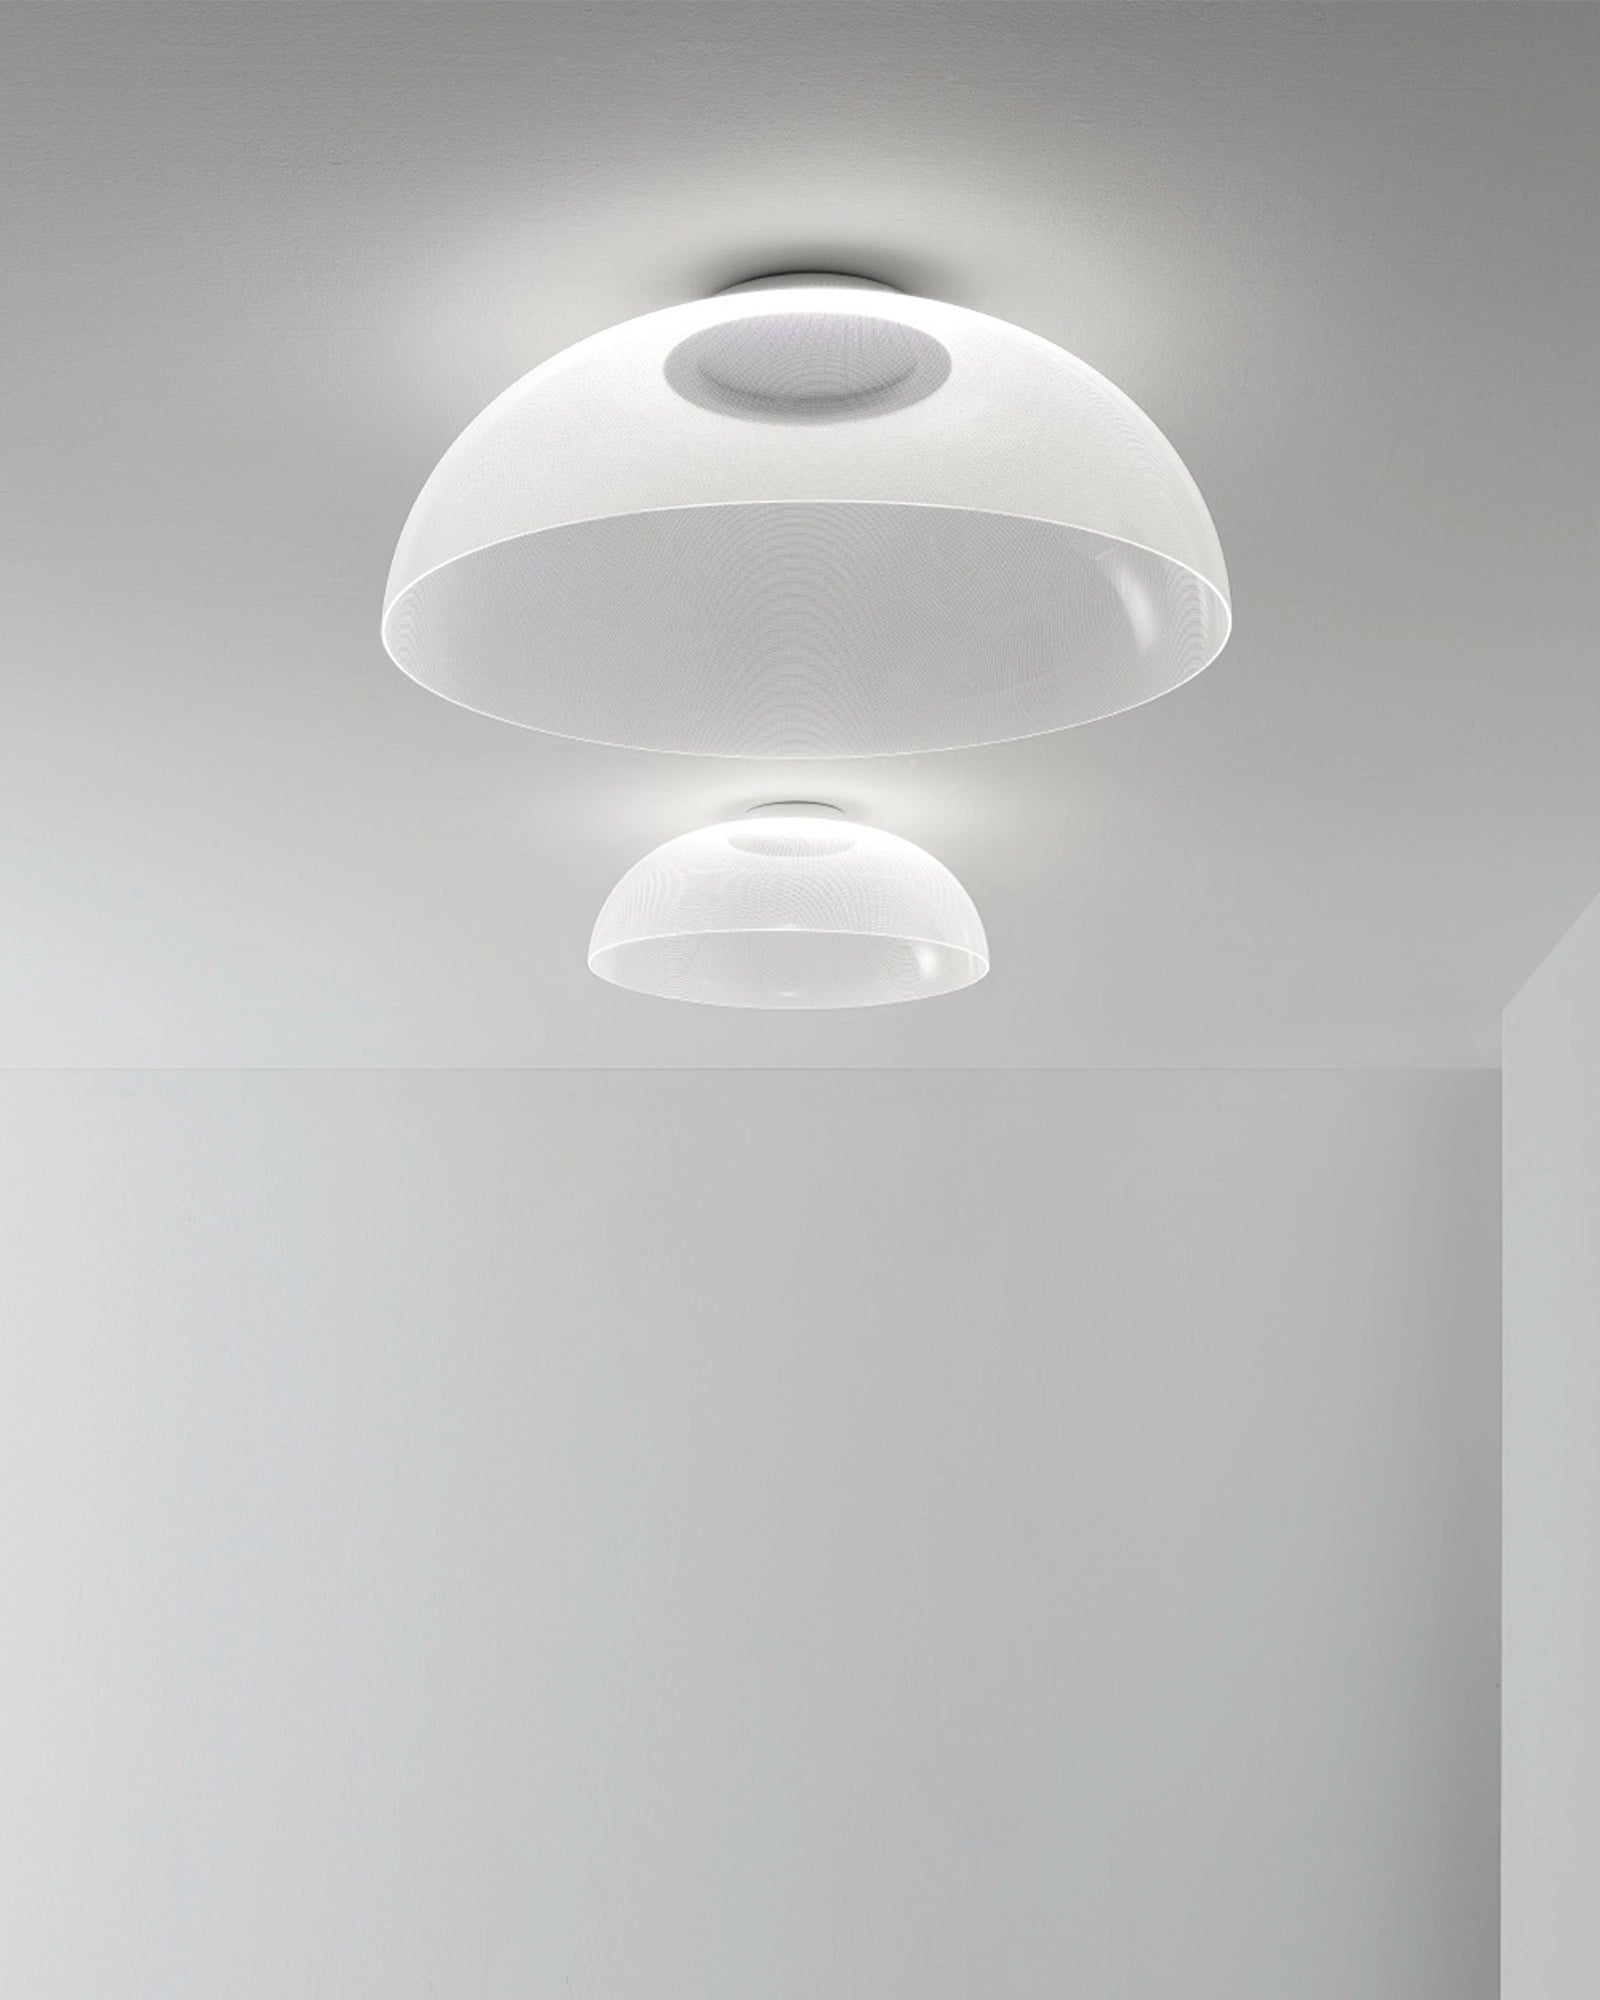 Demi Ceiling Light by Stilnovo, a clear ceiling lamp in two sizes.